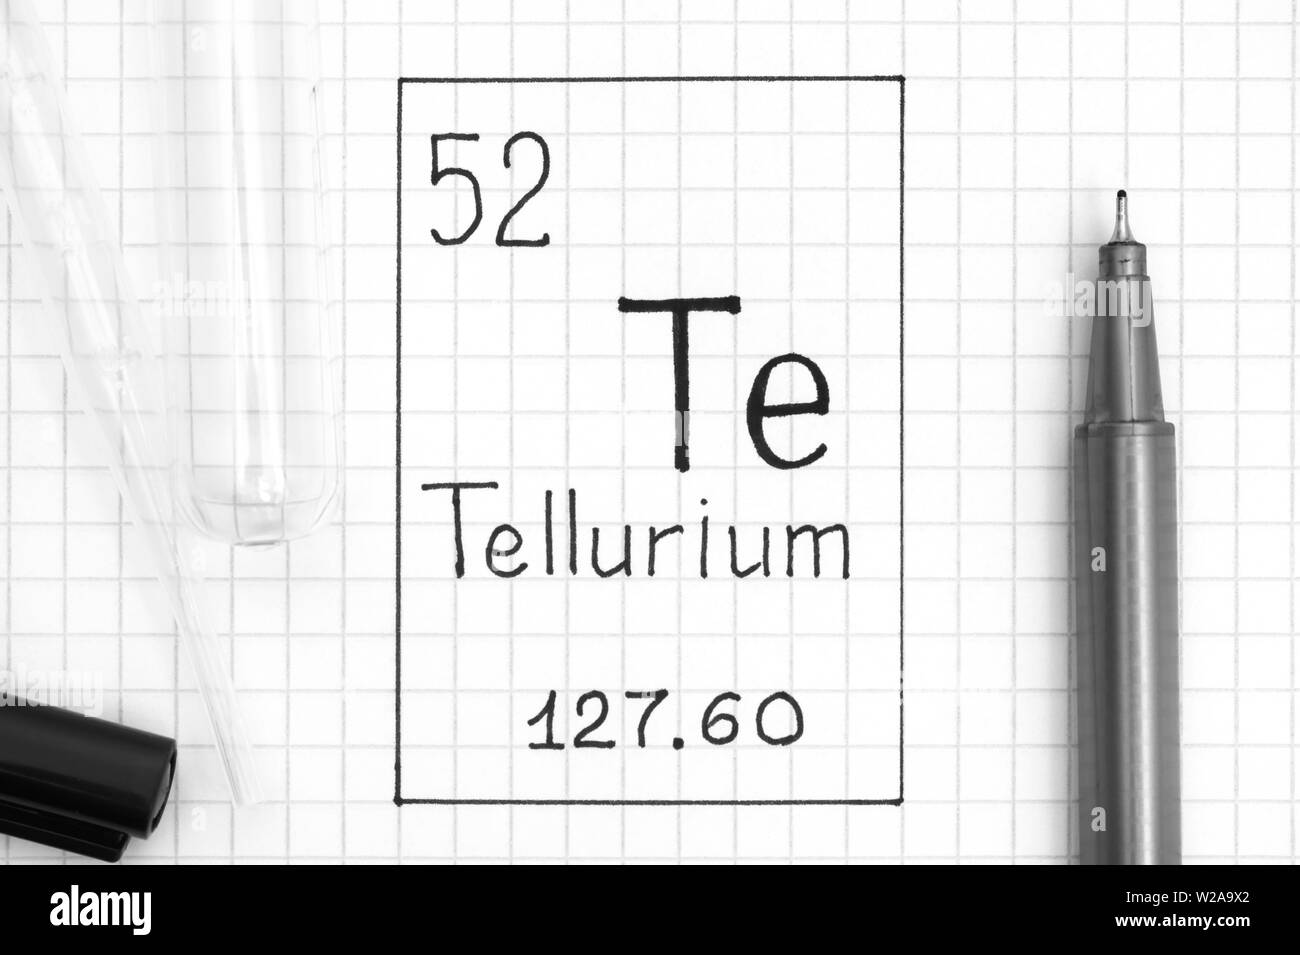 The Periodic table of elements. Handwriting chemical element Tellurium Te with black pen, test tube and pipette. Close-up. Stock Photo